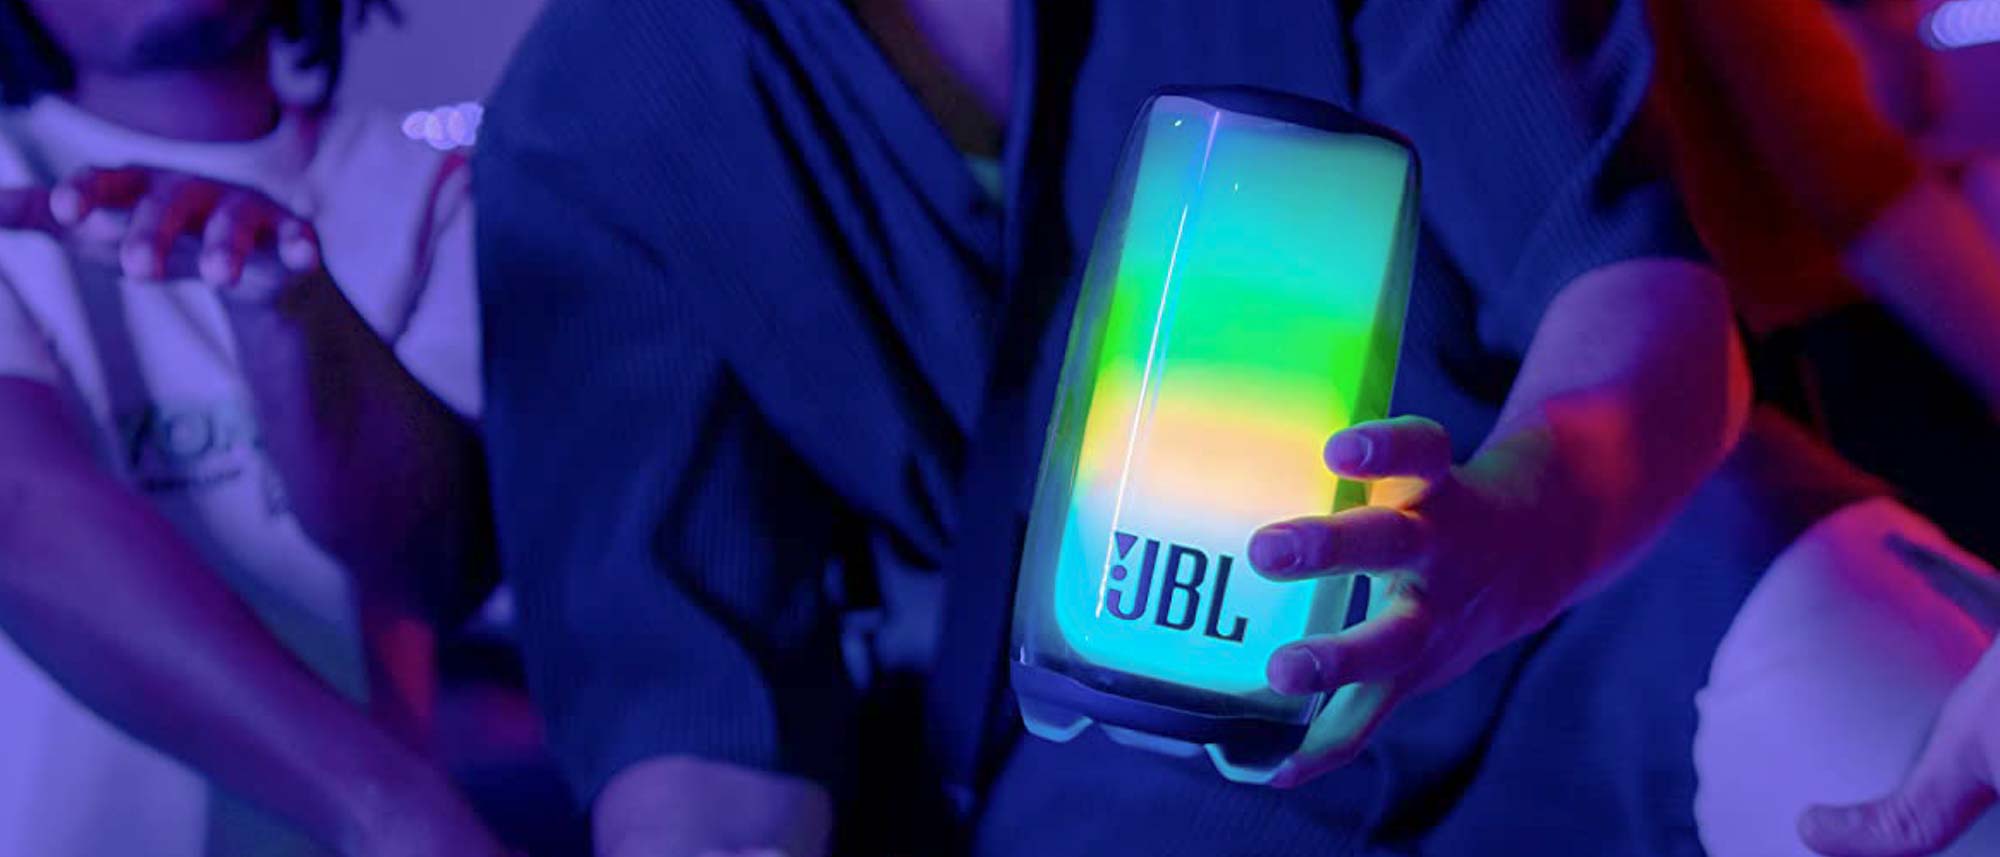 JBL Pulse 5 Wireless Bluetooth Speaker with Party Lights